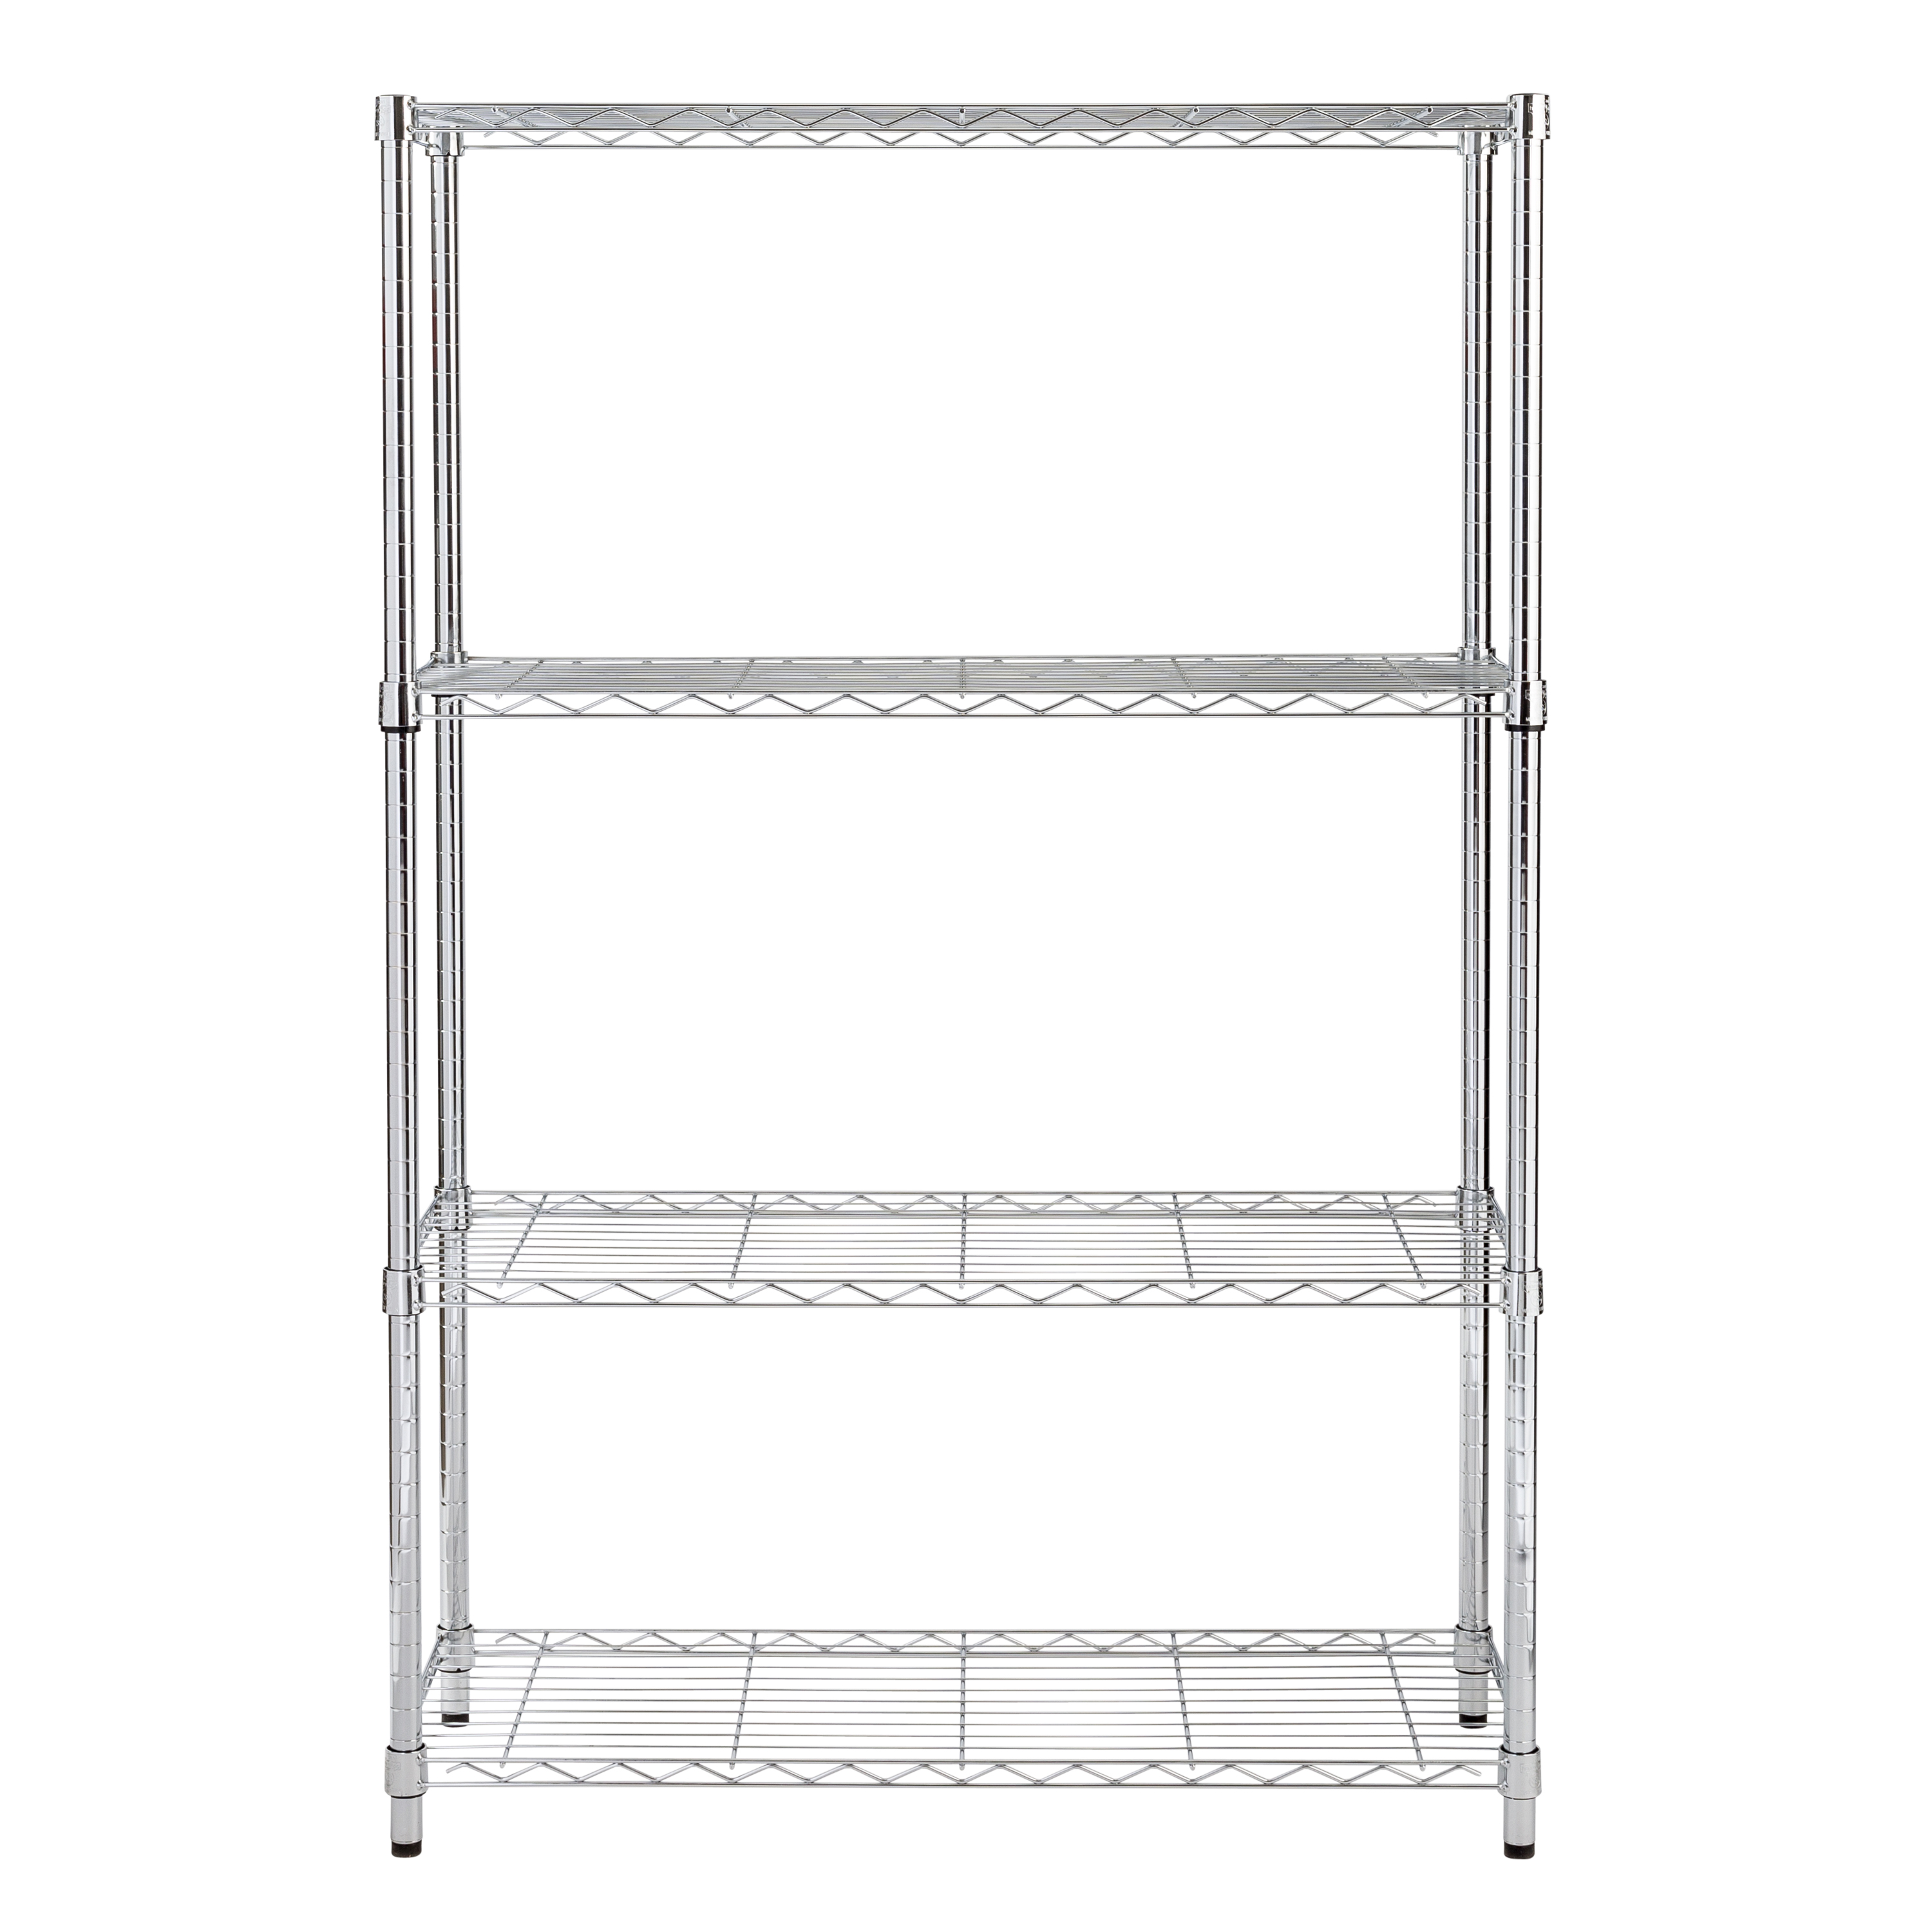 Honey Can Do 4-Tier Heavy-Duty Adjustable Shelving Unit With 250-Lb Weight Capacity, Chrome, Basement/Garage - image 4 of 5